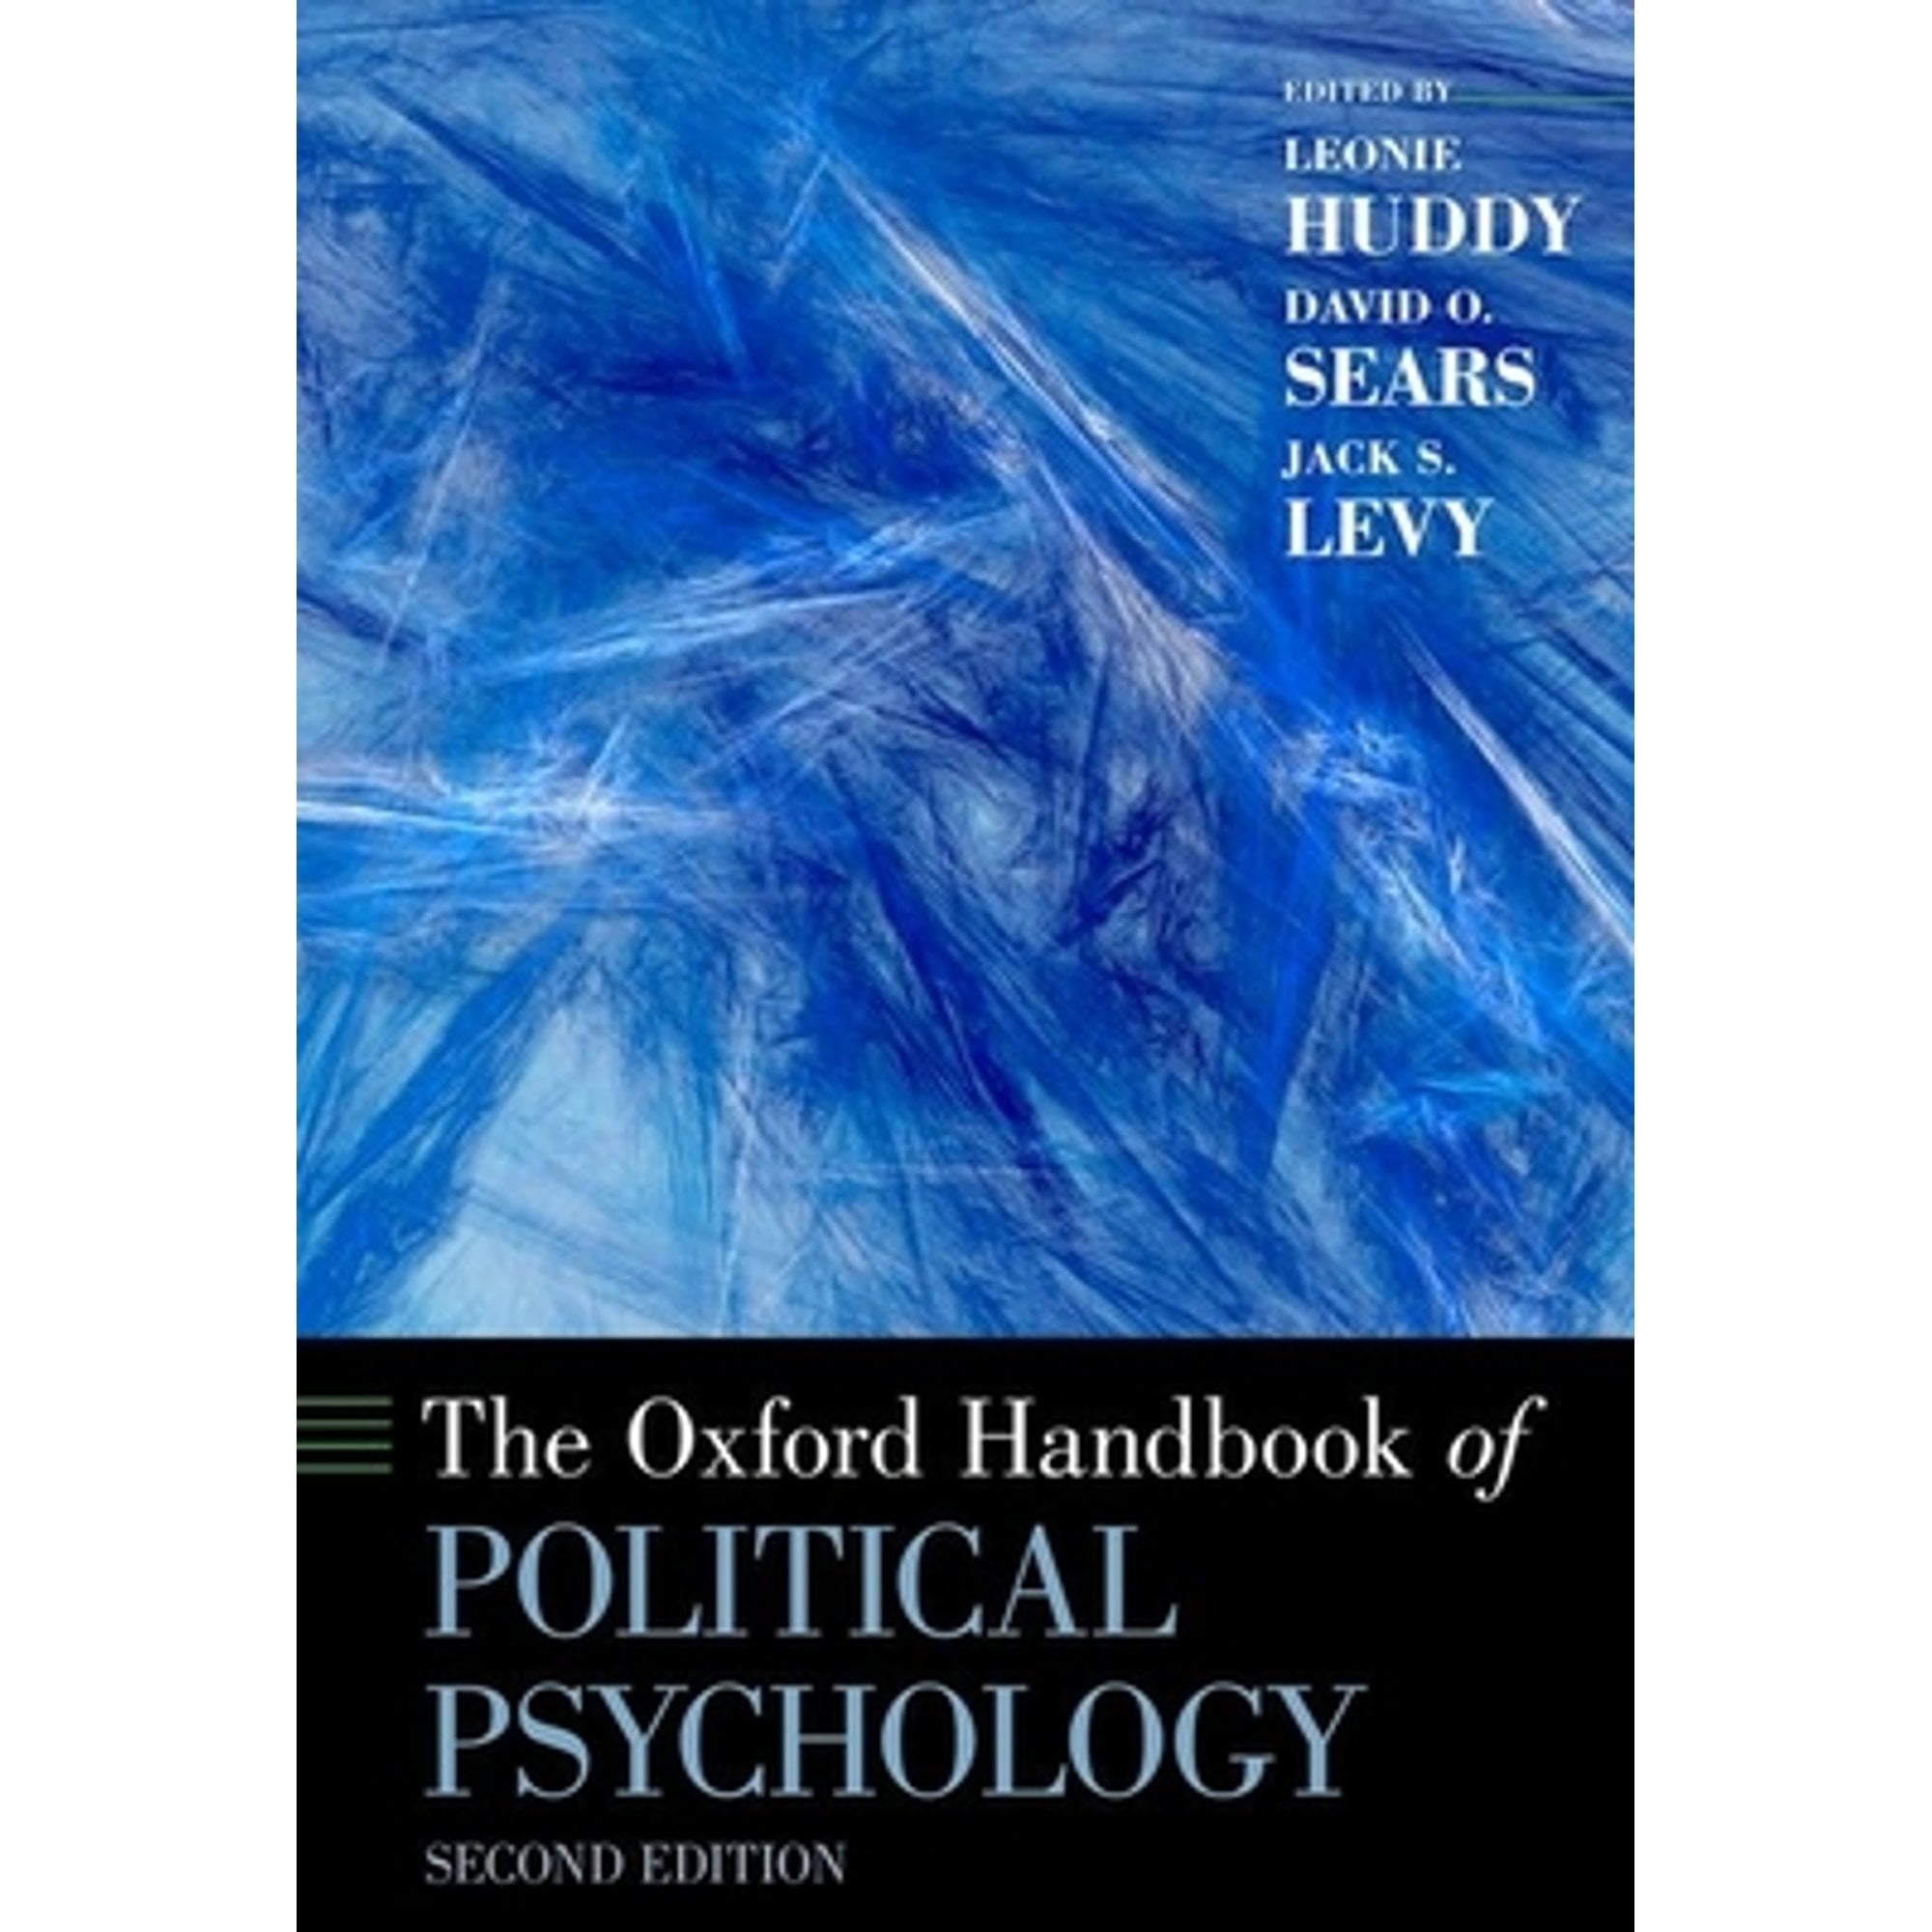 The Oxford Handbook of Political Psychology: Second Edition (Pre-Owned  Paperback 9780199760107) by Leonie Huddy, David O Sears, Jack S Levy -  